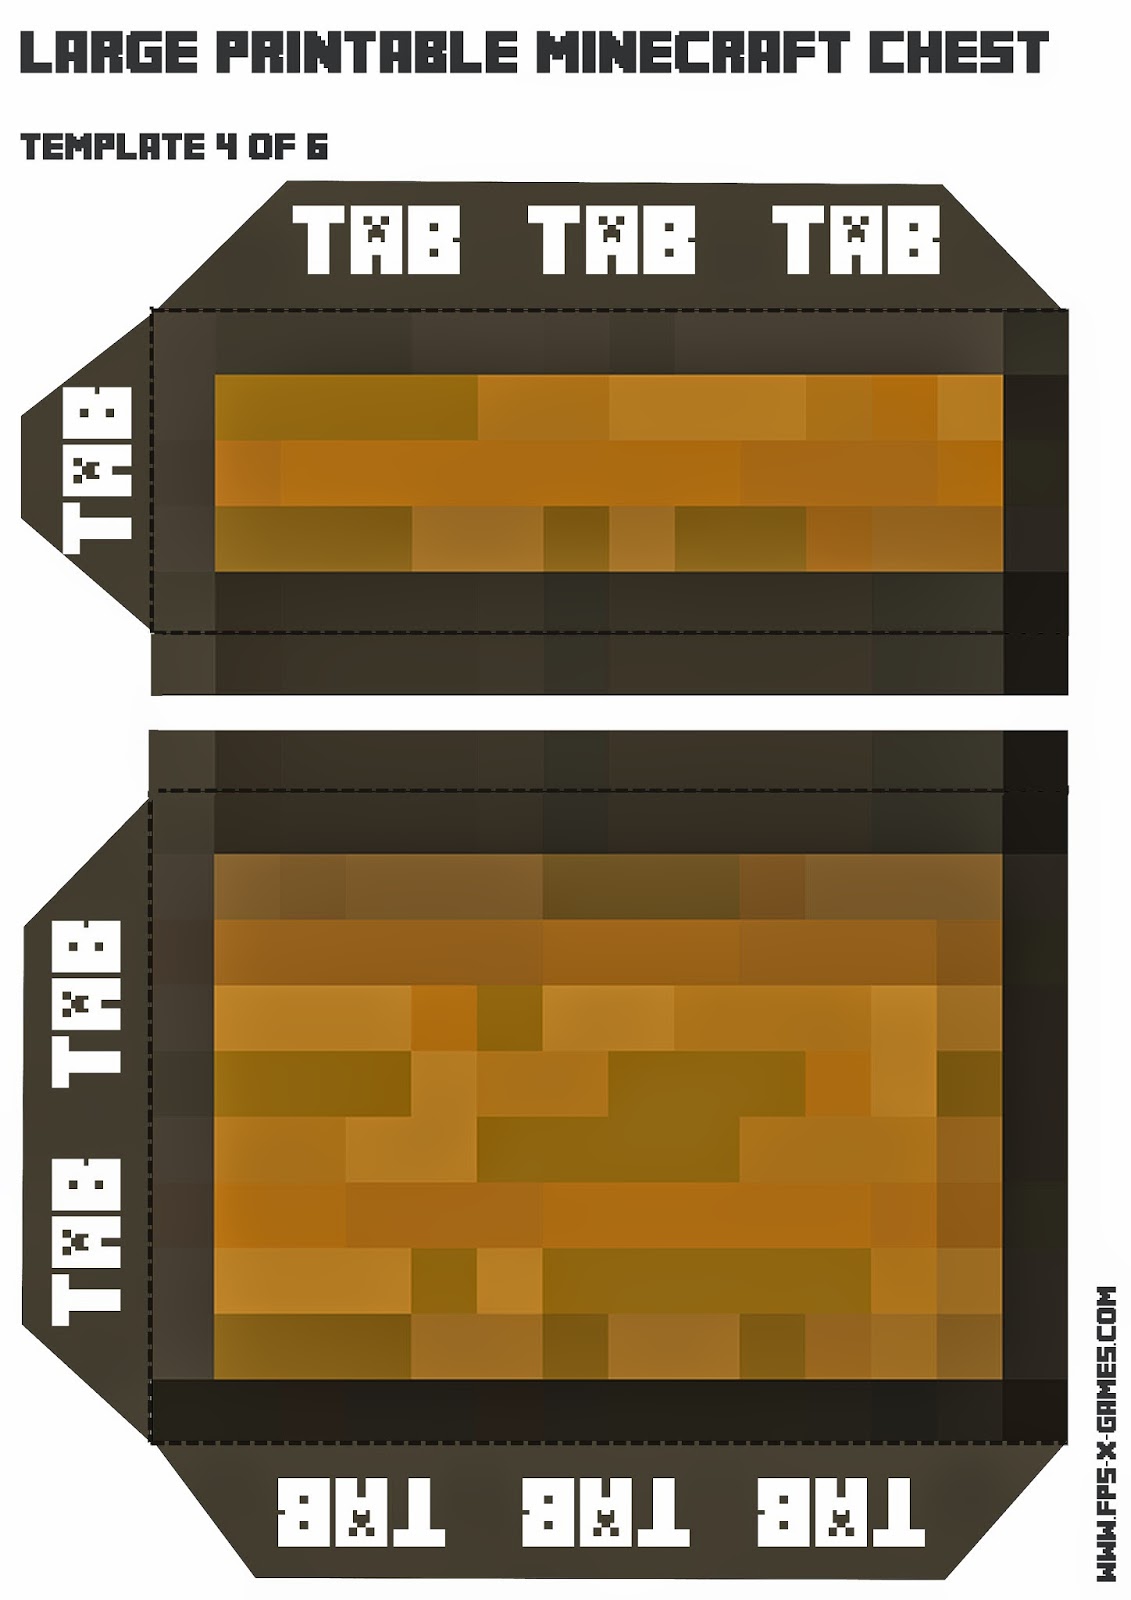 papercraft minecraft Minecraft life template chest of  size 6 4 chest, printable Free